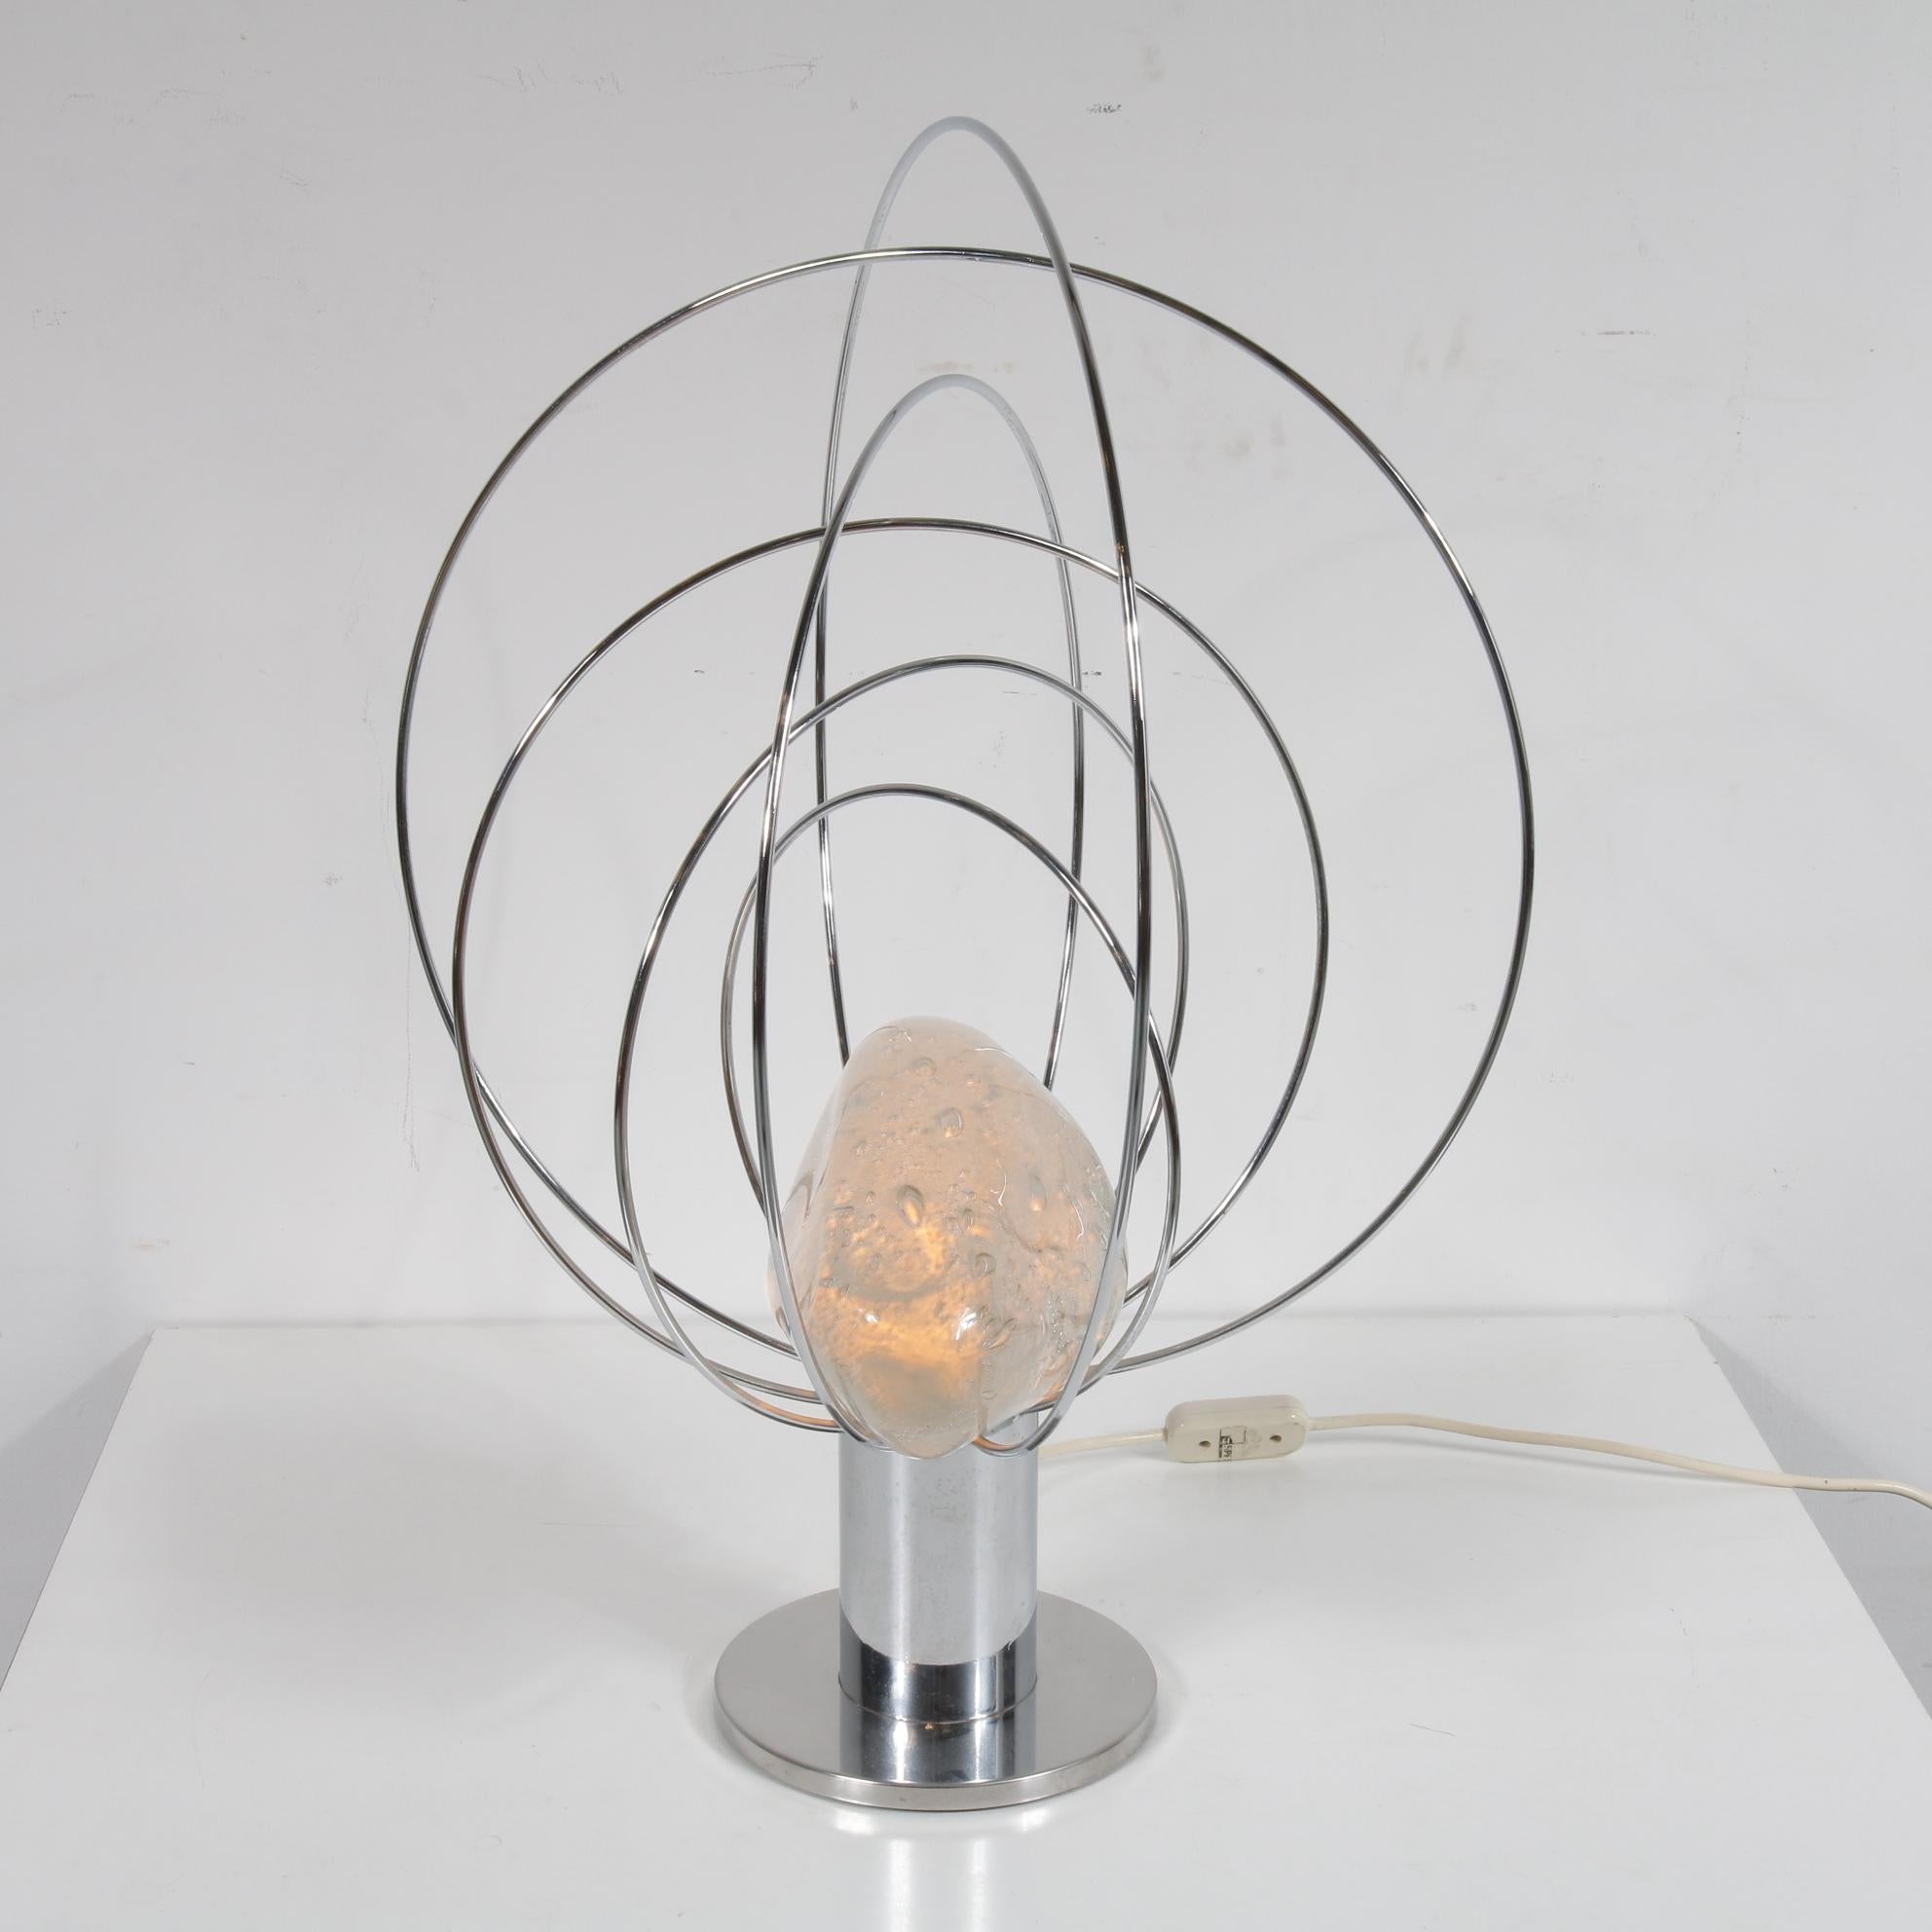 Plated Angelo Brotto Sculptural Table Lamp for Esperia, Italy, 1960 For Sale